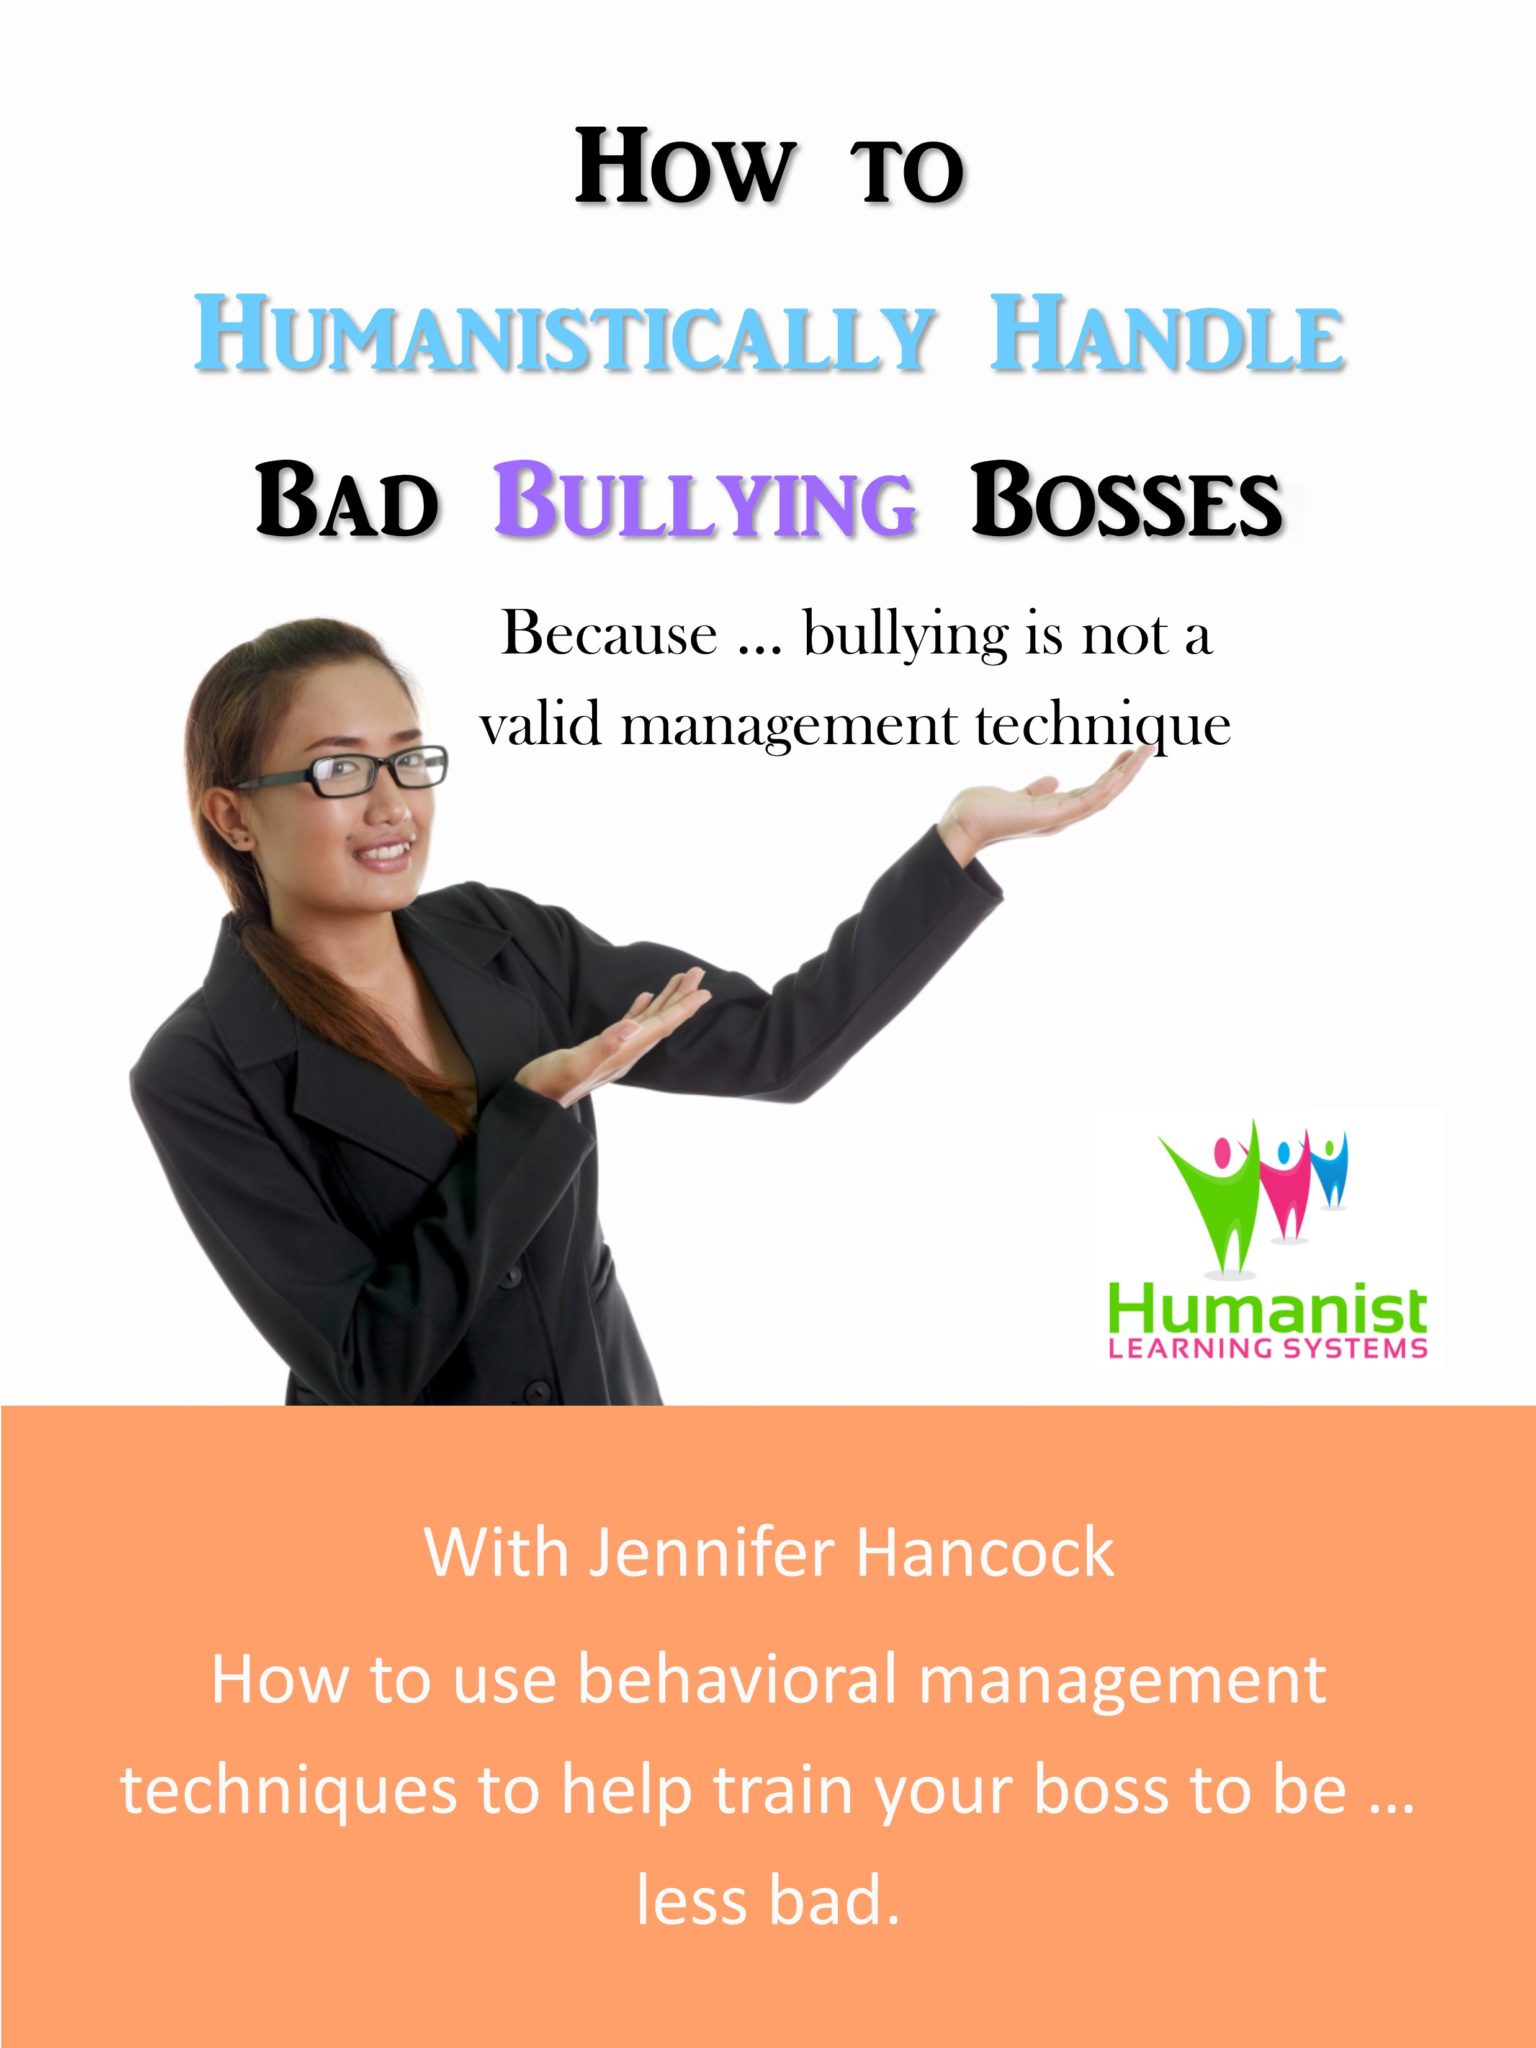 bullying bosses case study answers